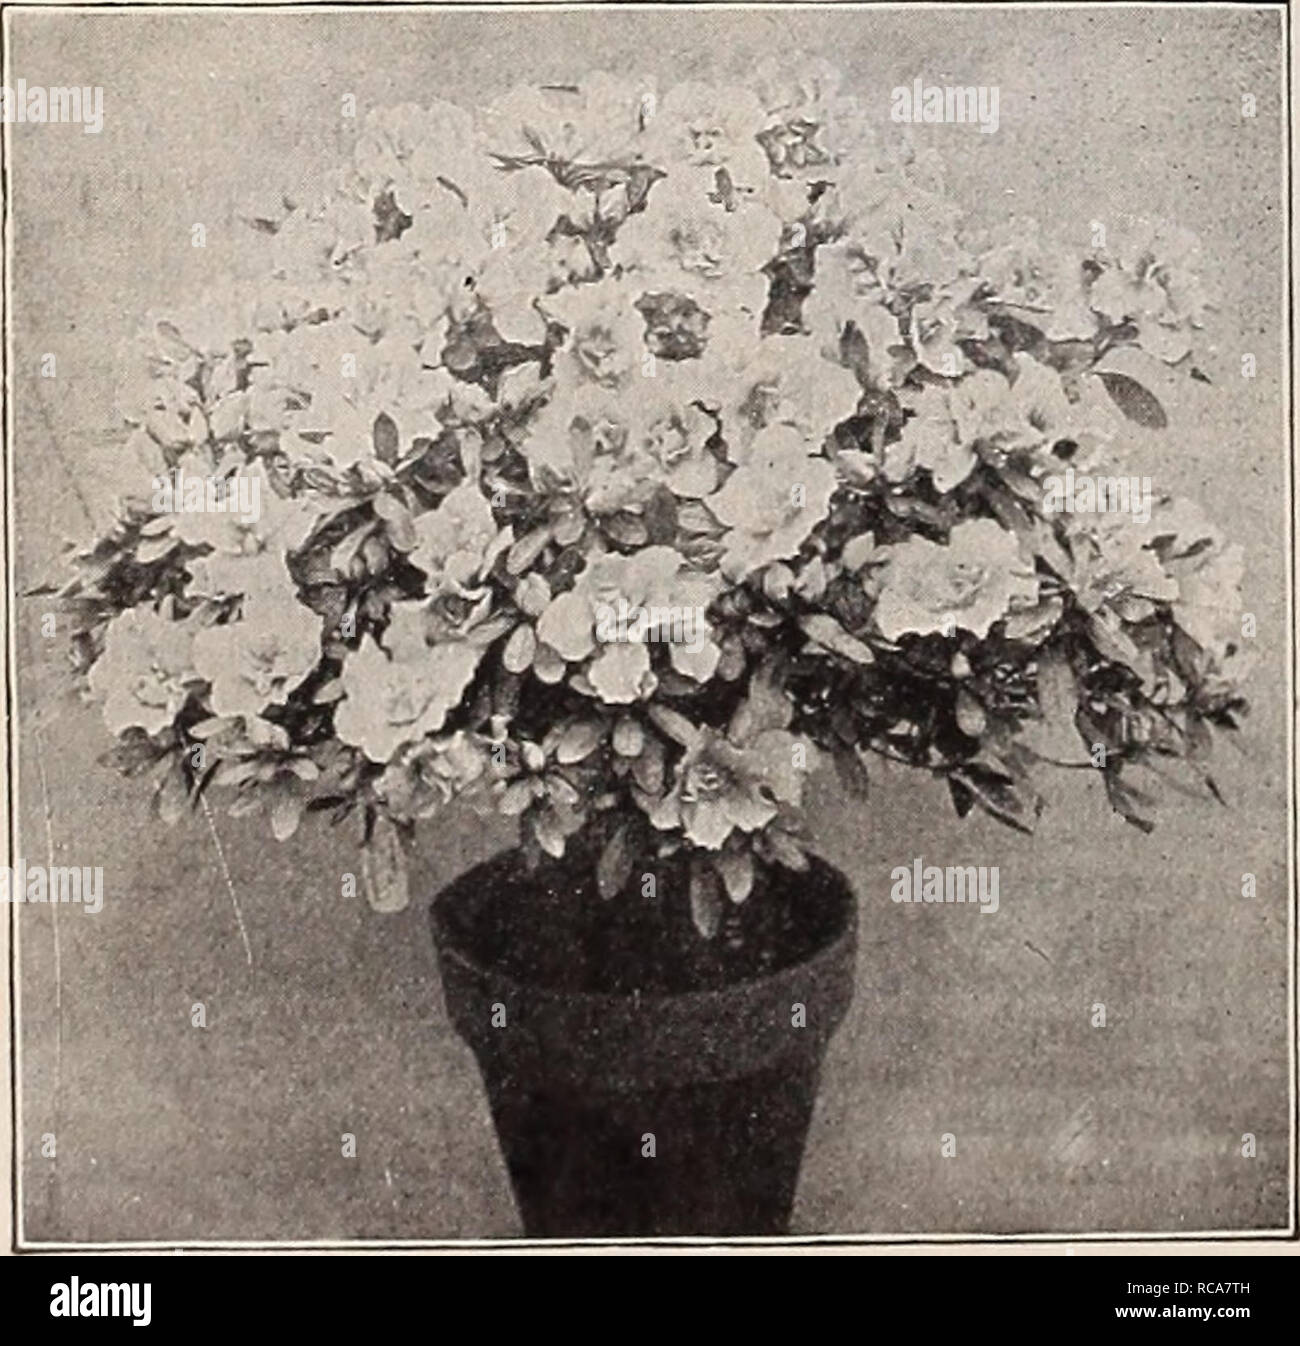 . Dreer's autumn catalogue 1911. Bulbs (Plants) Catalogs; Flowers Seeds Catalogs; Gardening Equipment and supplies Catalogs; Nurseries (Horticulture) Catalogs; Fruit Seeds Catalogs; Vegetables Seeds Catalogs. ARDISIA CRENUI.ATA. A very ornamental greenhouse plant, with dark green foliage and clusters of brilliant red berries. 50 cts. each. ASPARAGUS. Plumosus Nanus. This graceful variety is finer than the most delicate fern, and is an excellent house plant. 15 cts. and 25 cts. each; Â§1.50 and Â§2.50 per doz. Sprengeri. Invaluable as a decorative plant for growing in pots, window boxes, basket Stock Photo